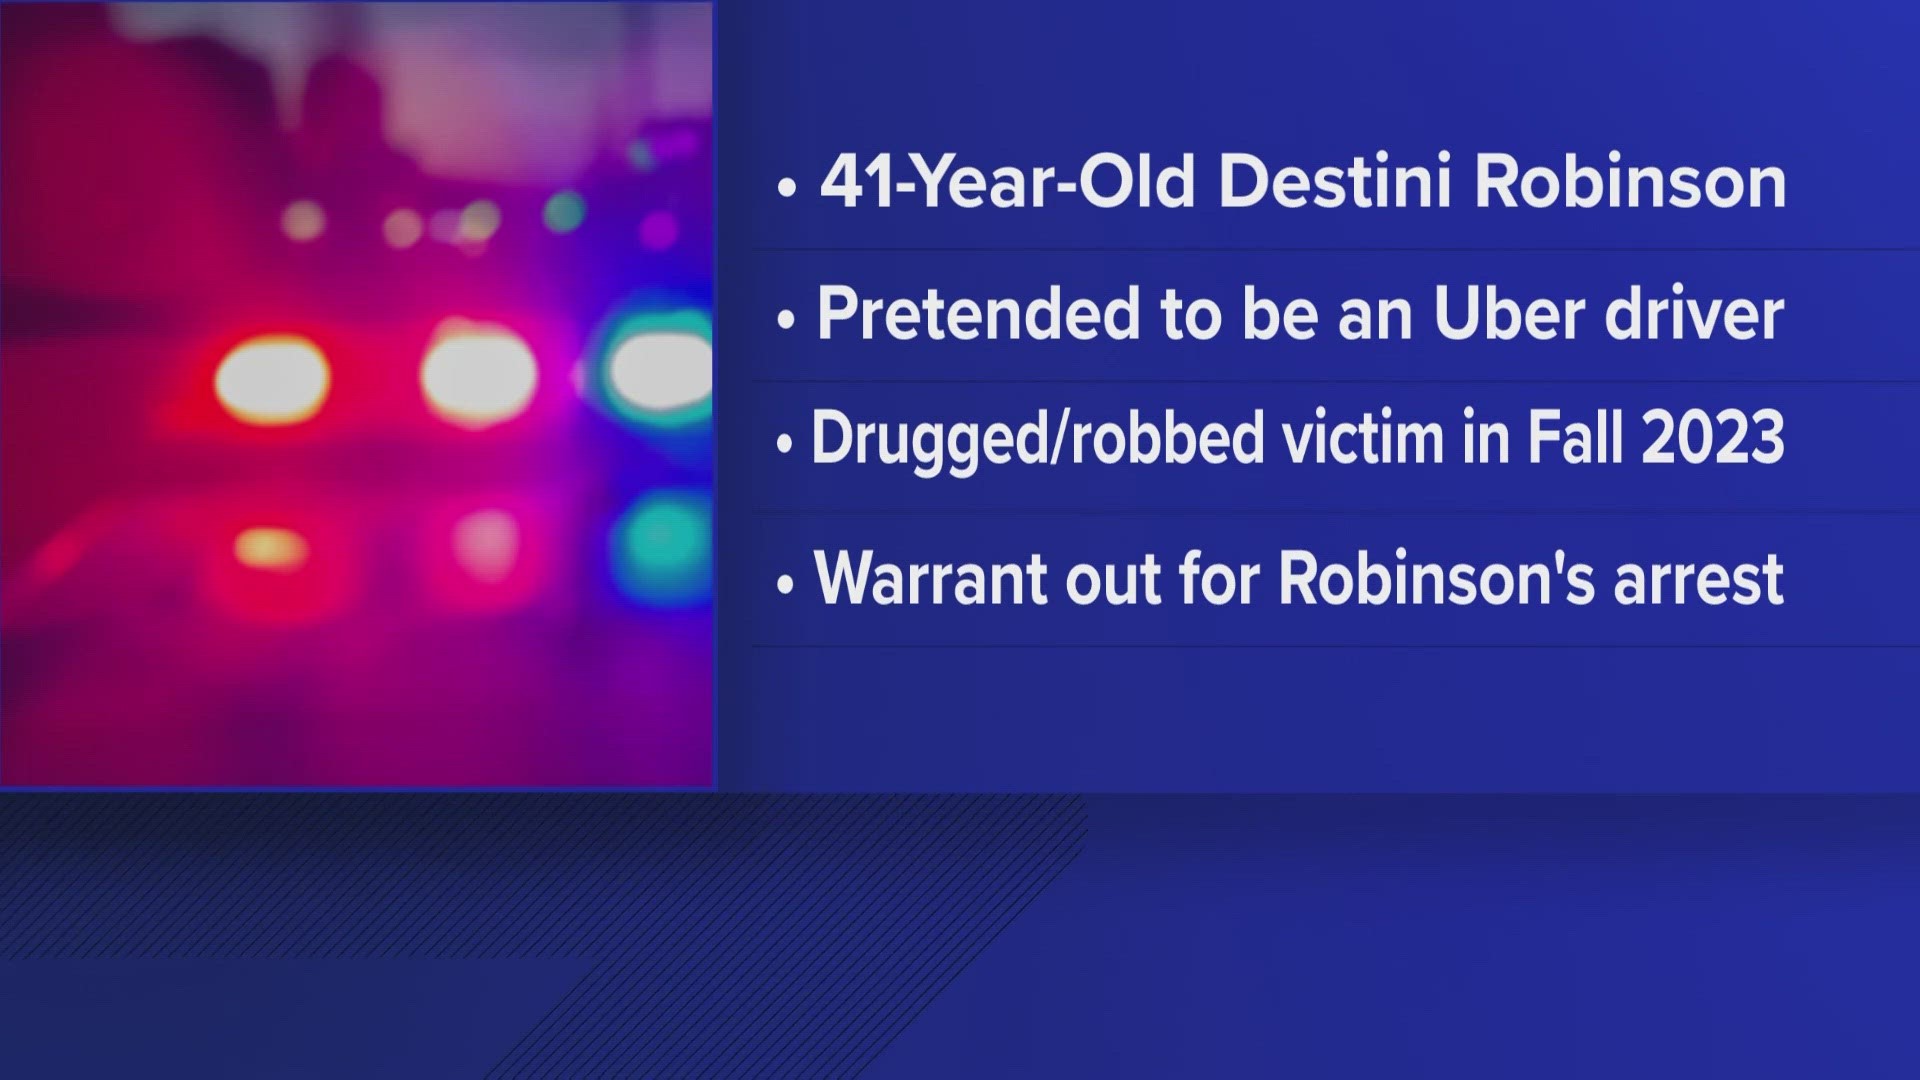 Destini Robinson allegedly pretended to be an Uber driver, then stole victims' phones and credit cards.